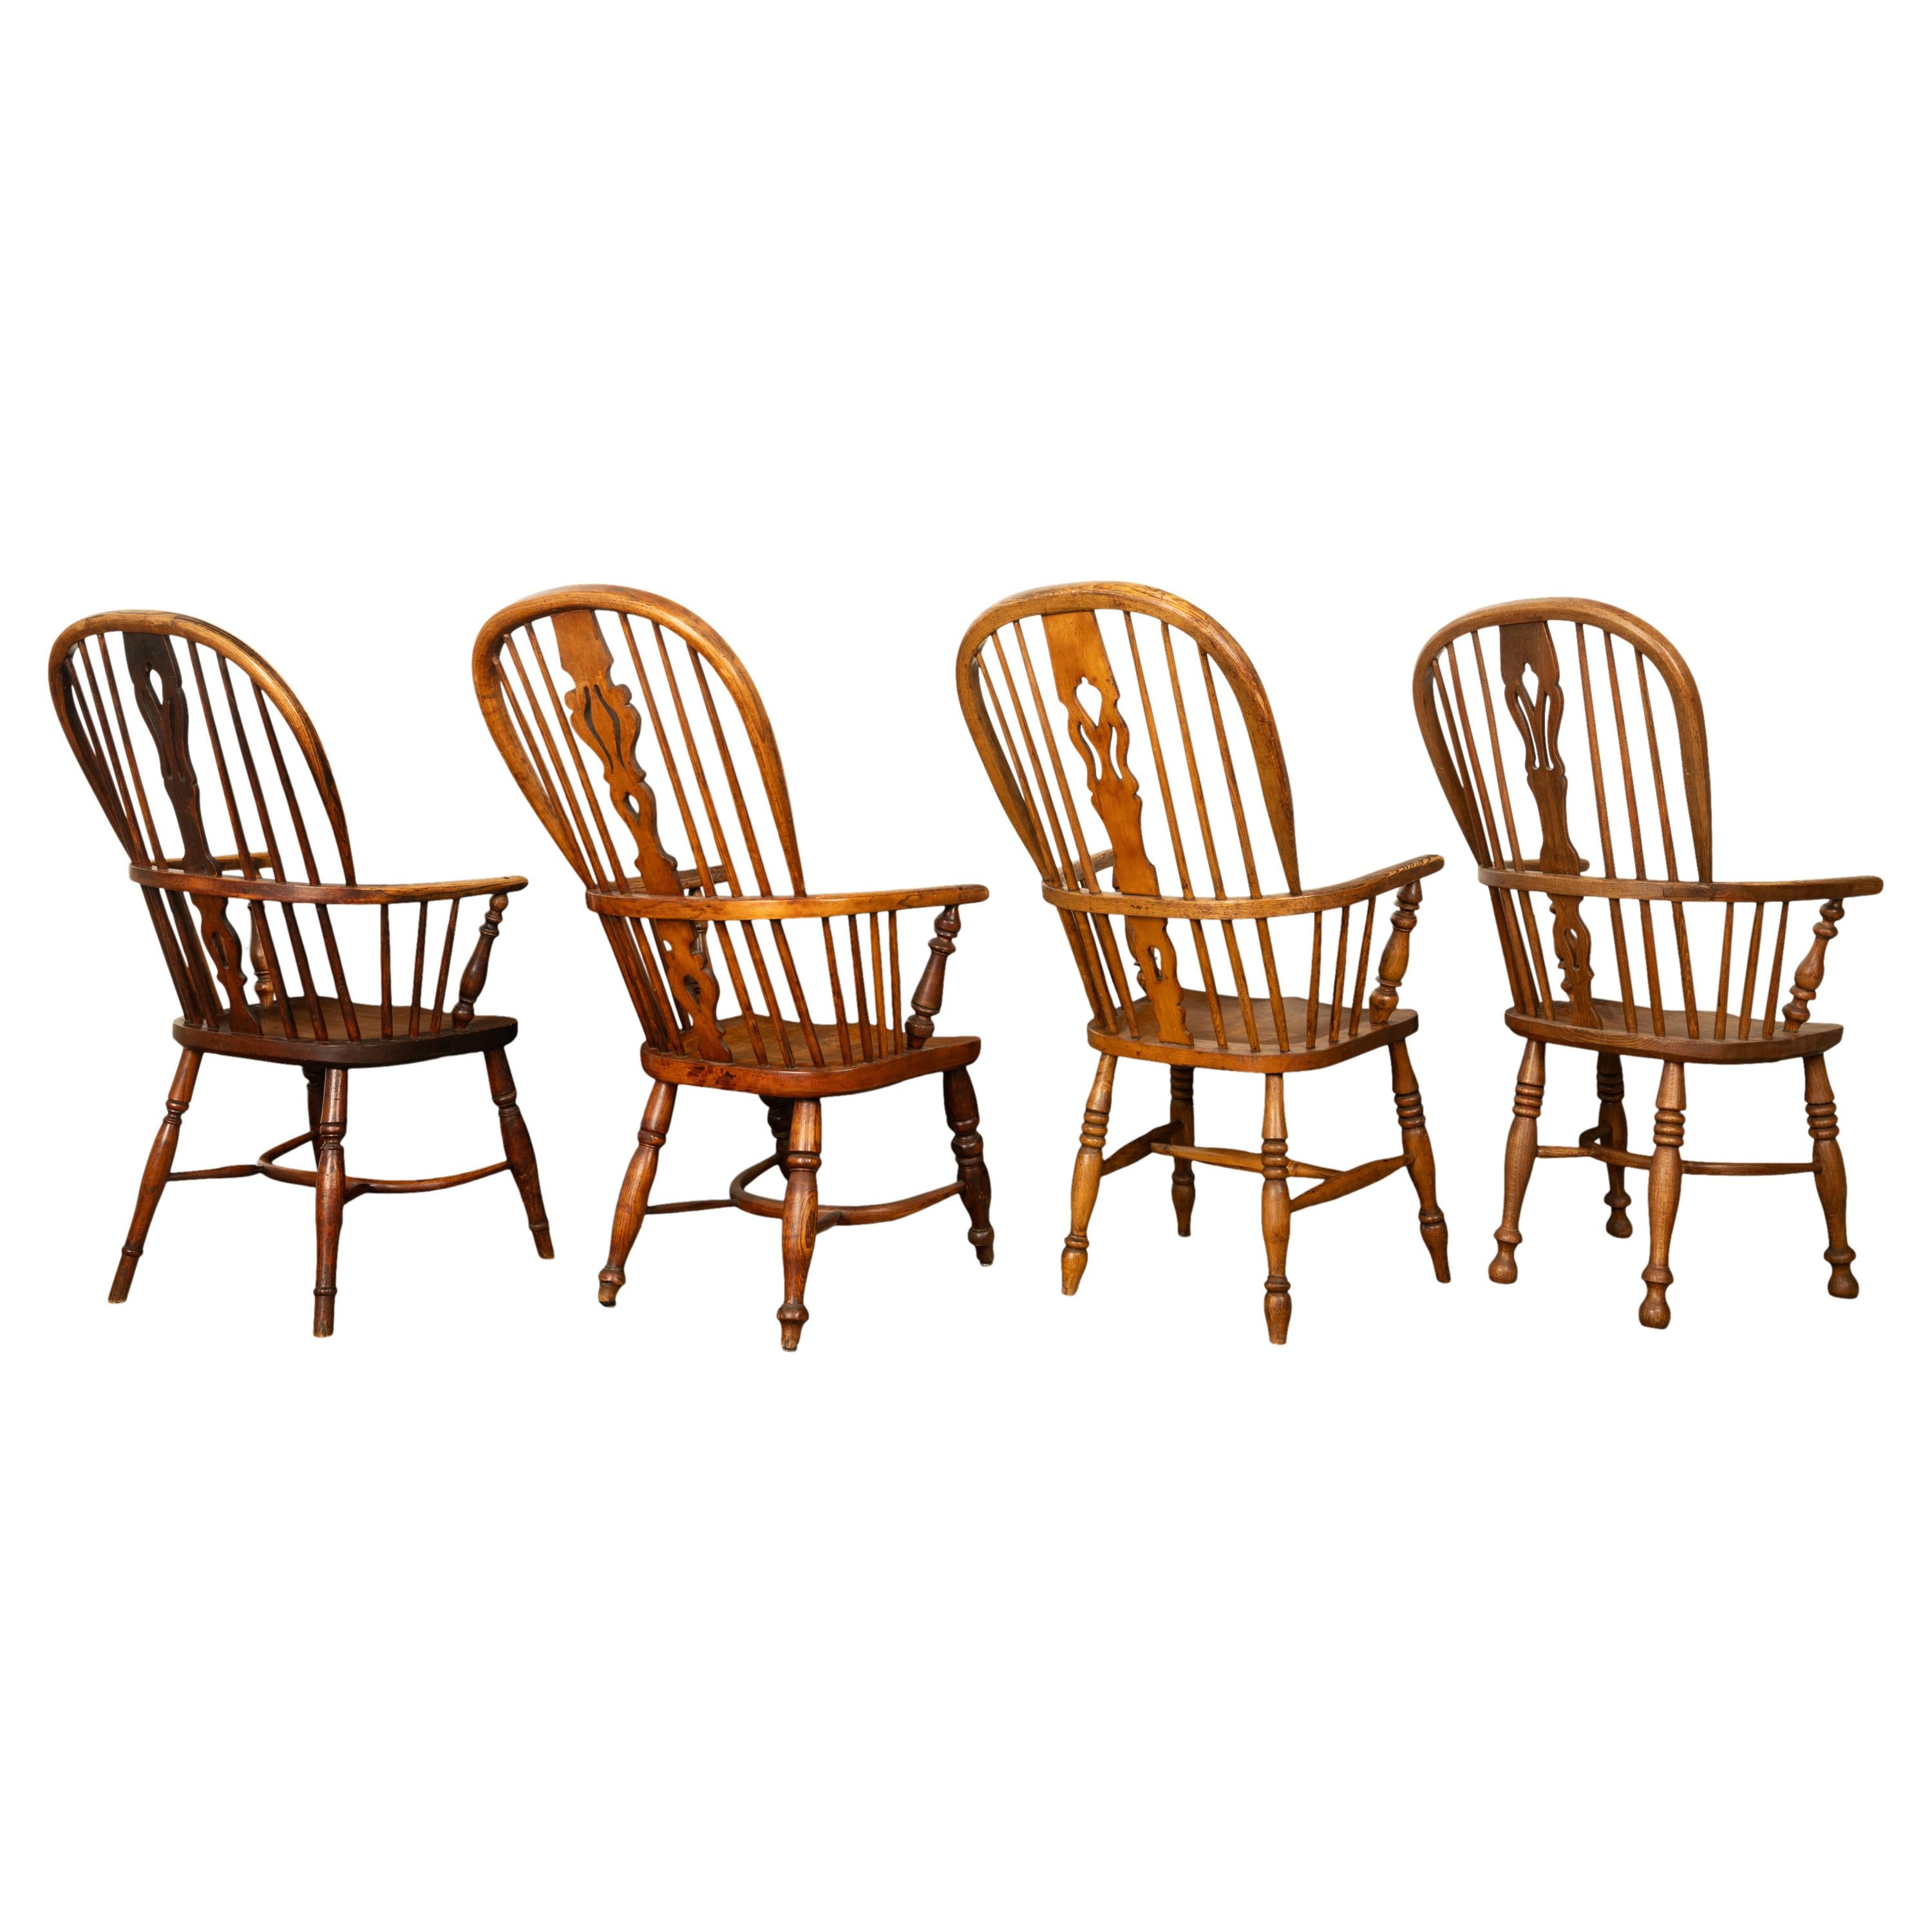 Set 4 Antique 19thC High-backed English Ash Elm Country Windsor Arm Chairs 1840  For Sale 4